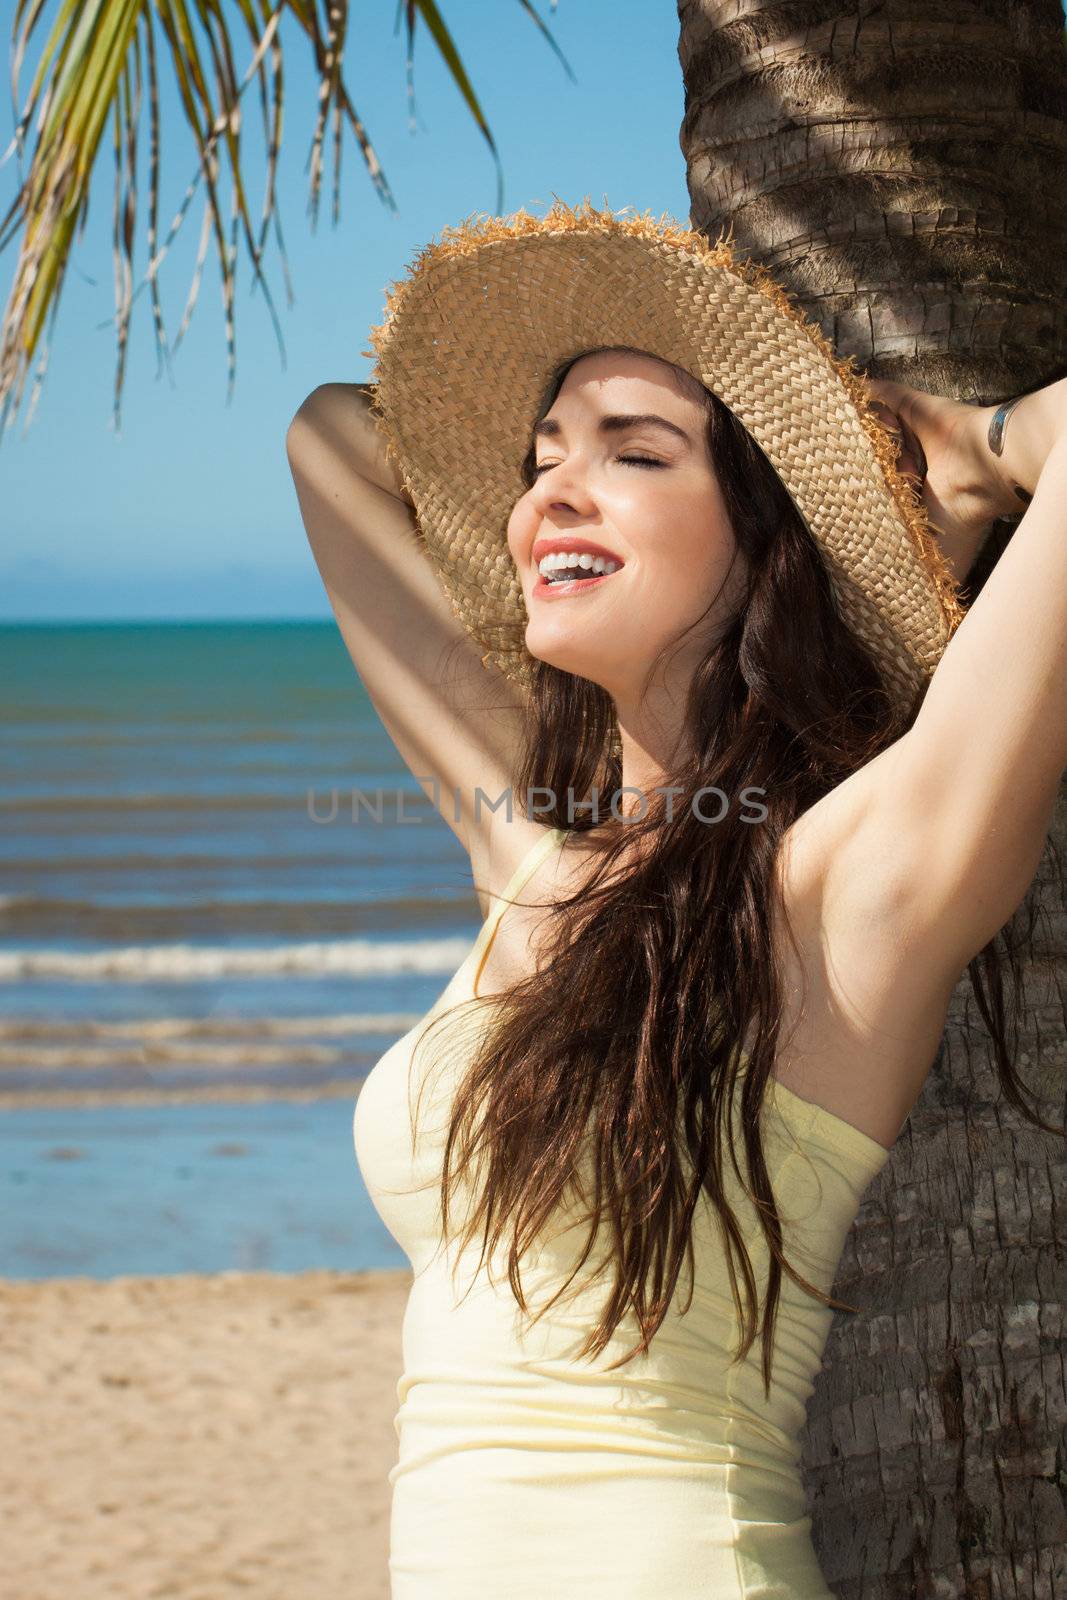 A beautiful young woman leaning against palm tree on a tropical beach wearing a straw hat.